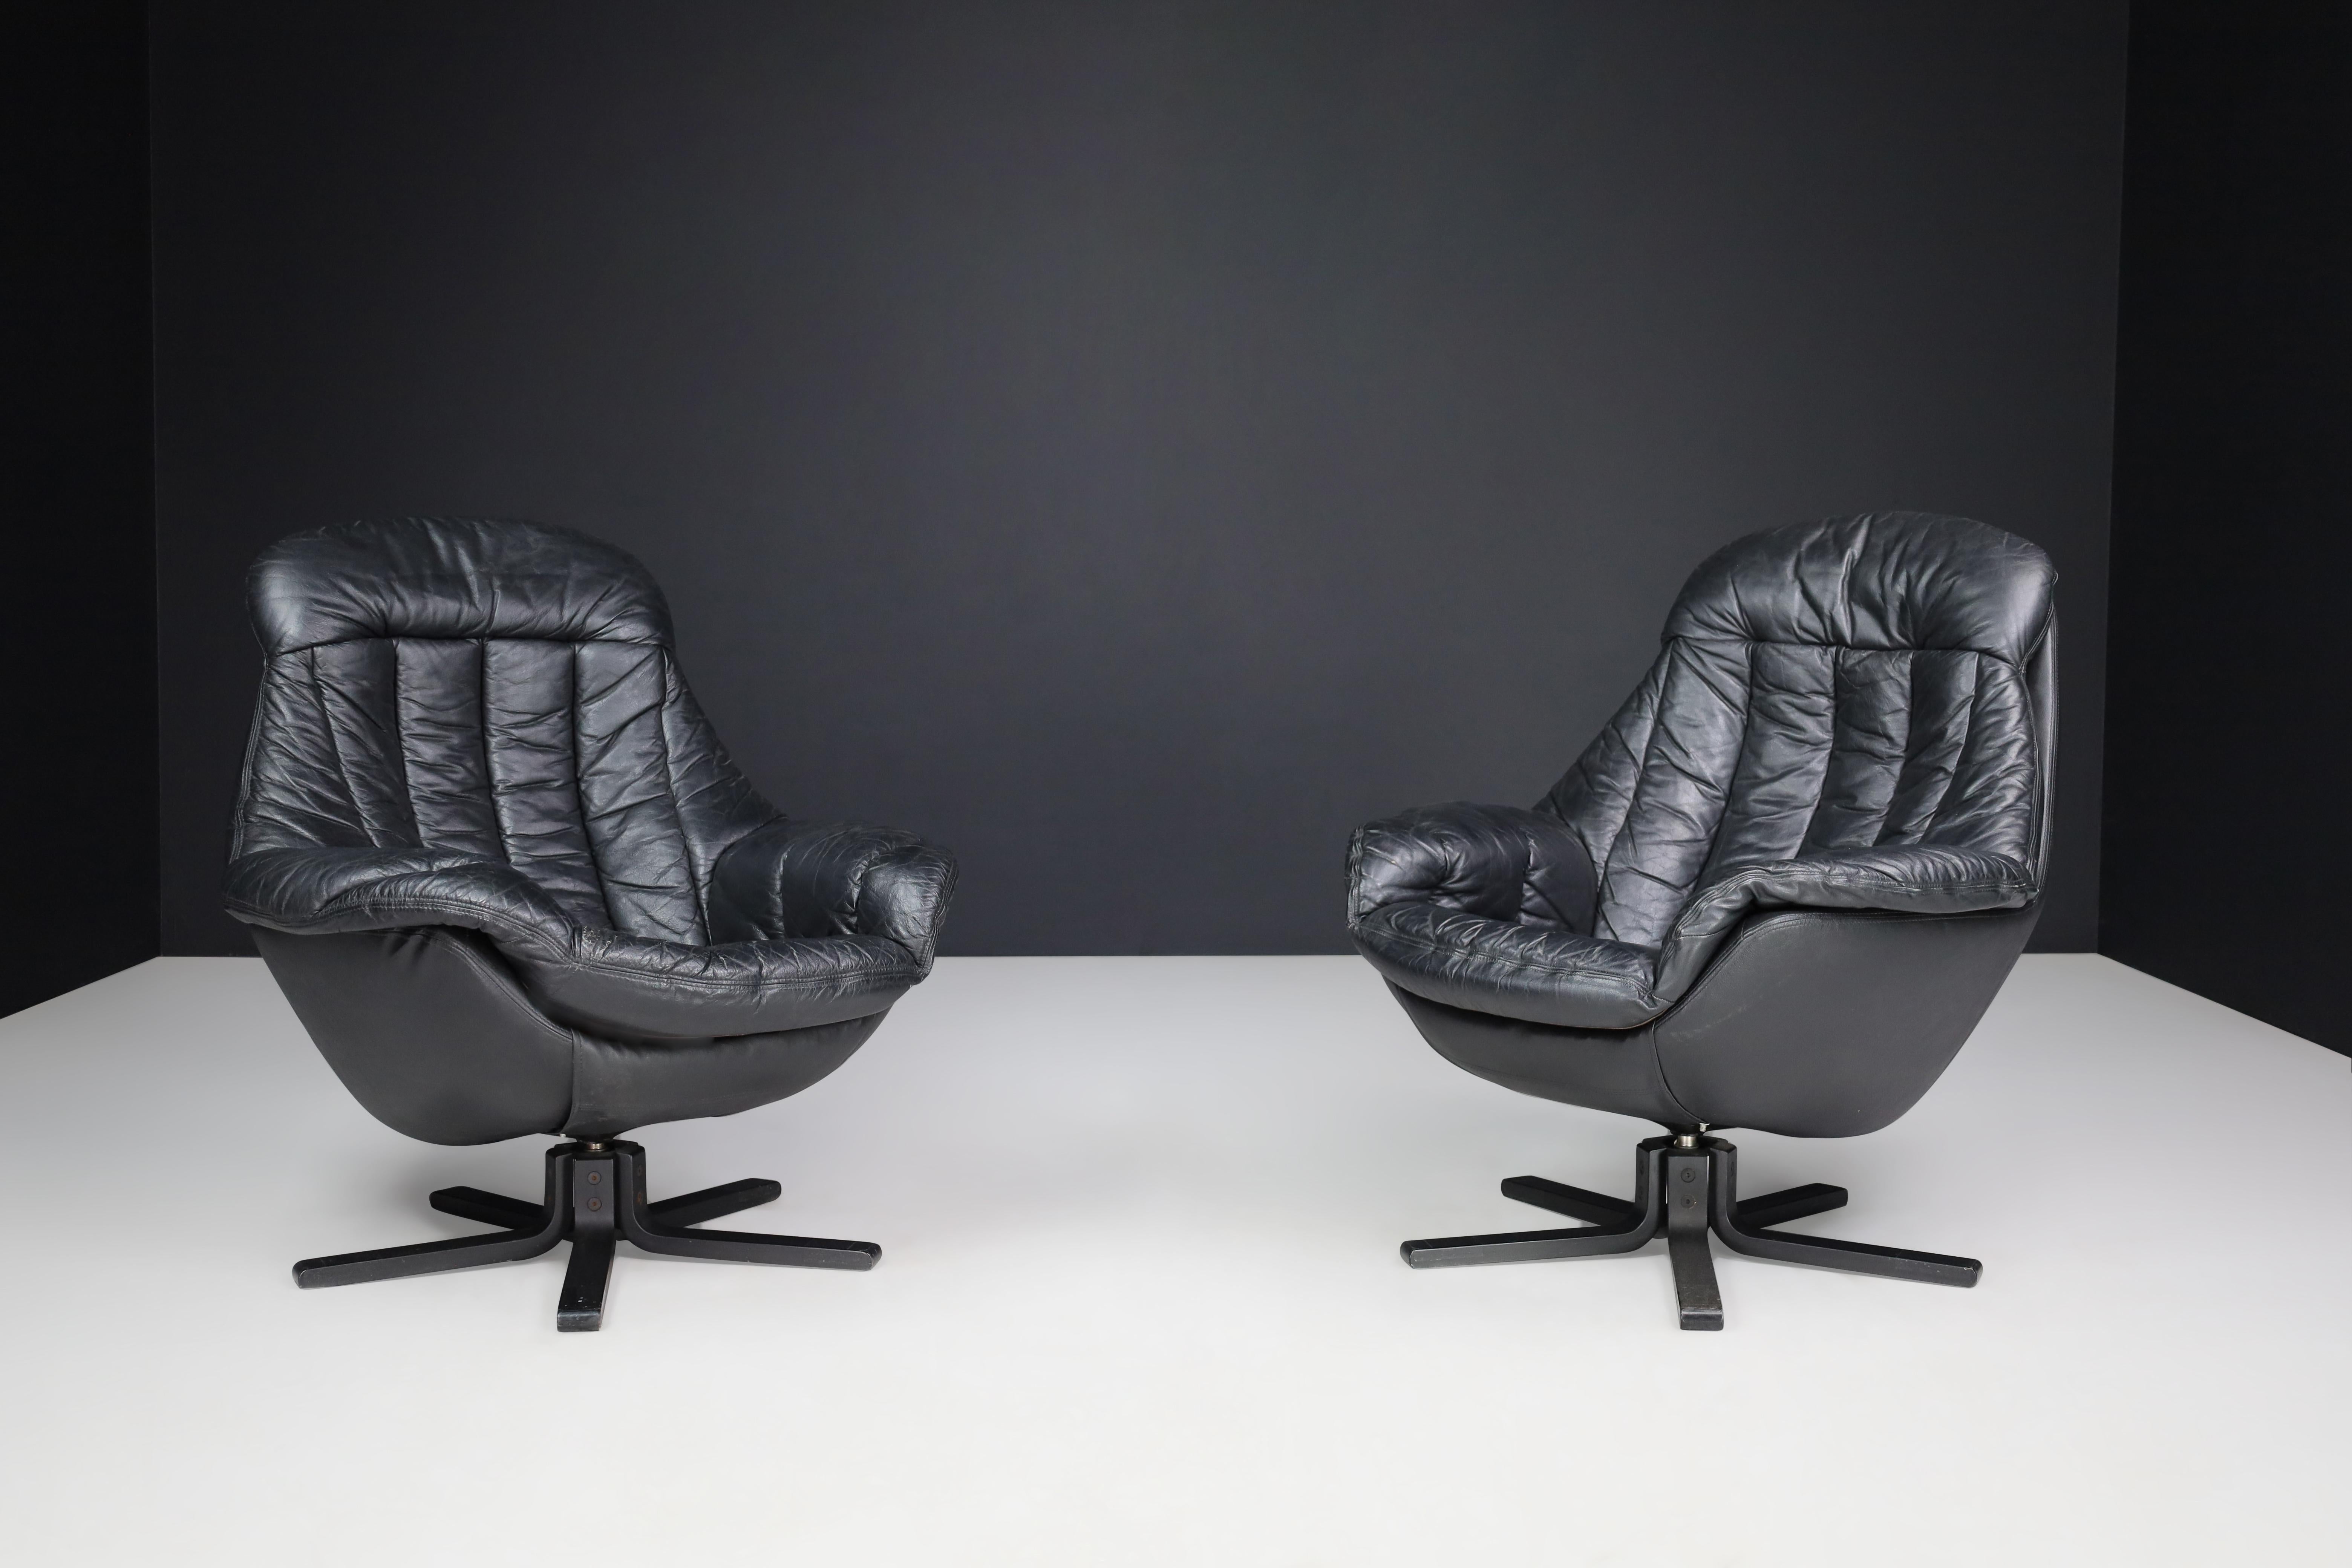 H.W. Klein for Bramin leather Swivel lounge chairs, Denmark 1970s

This vintage leather swivel lounge chair, designed by H.W. Klein for Bramin in Denmark during the 1970s, is a beautiful addition to any interior. Its ergonomic design offers a